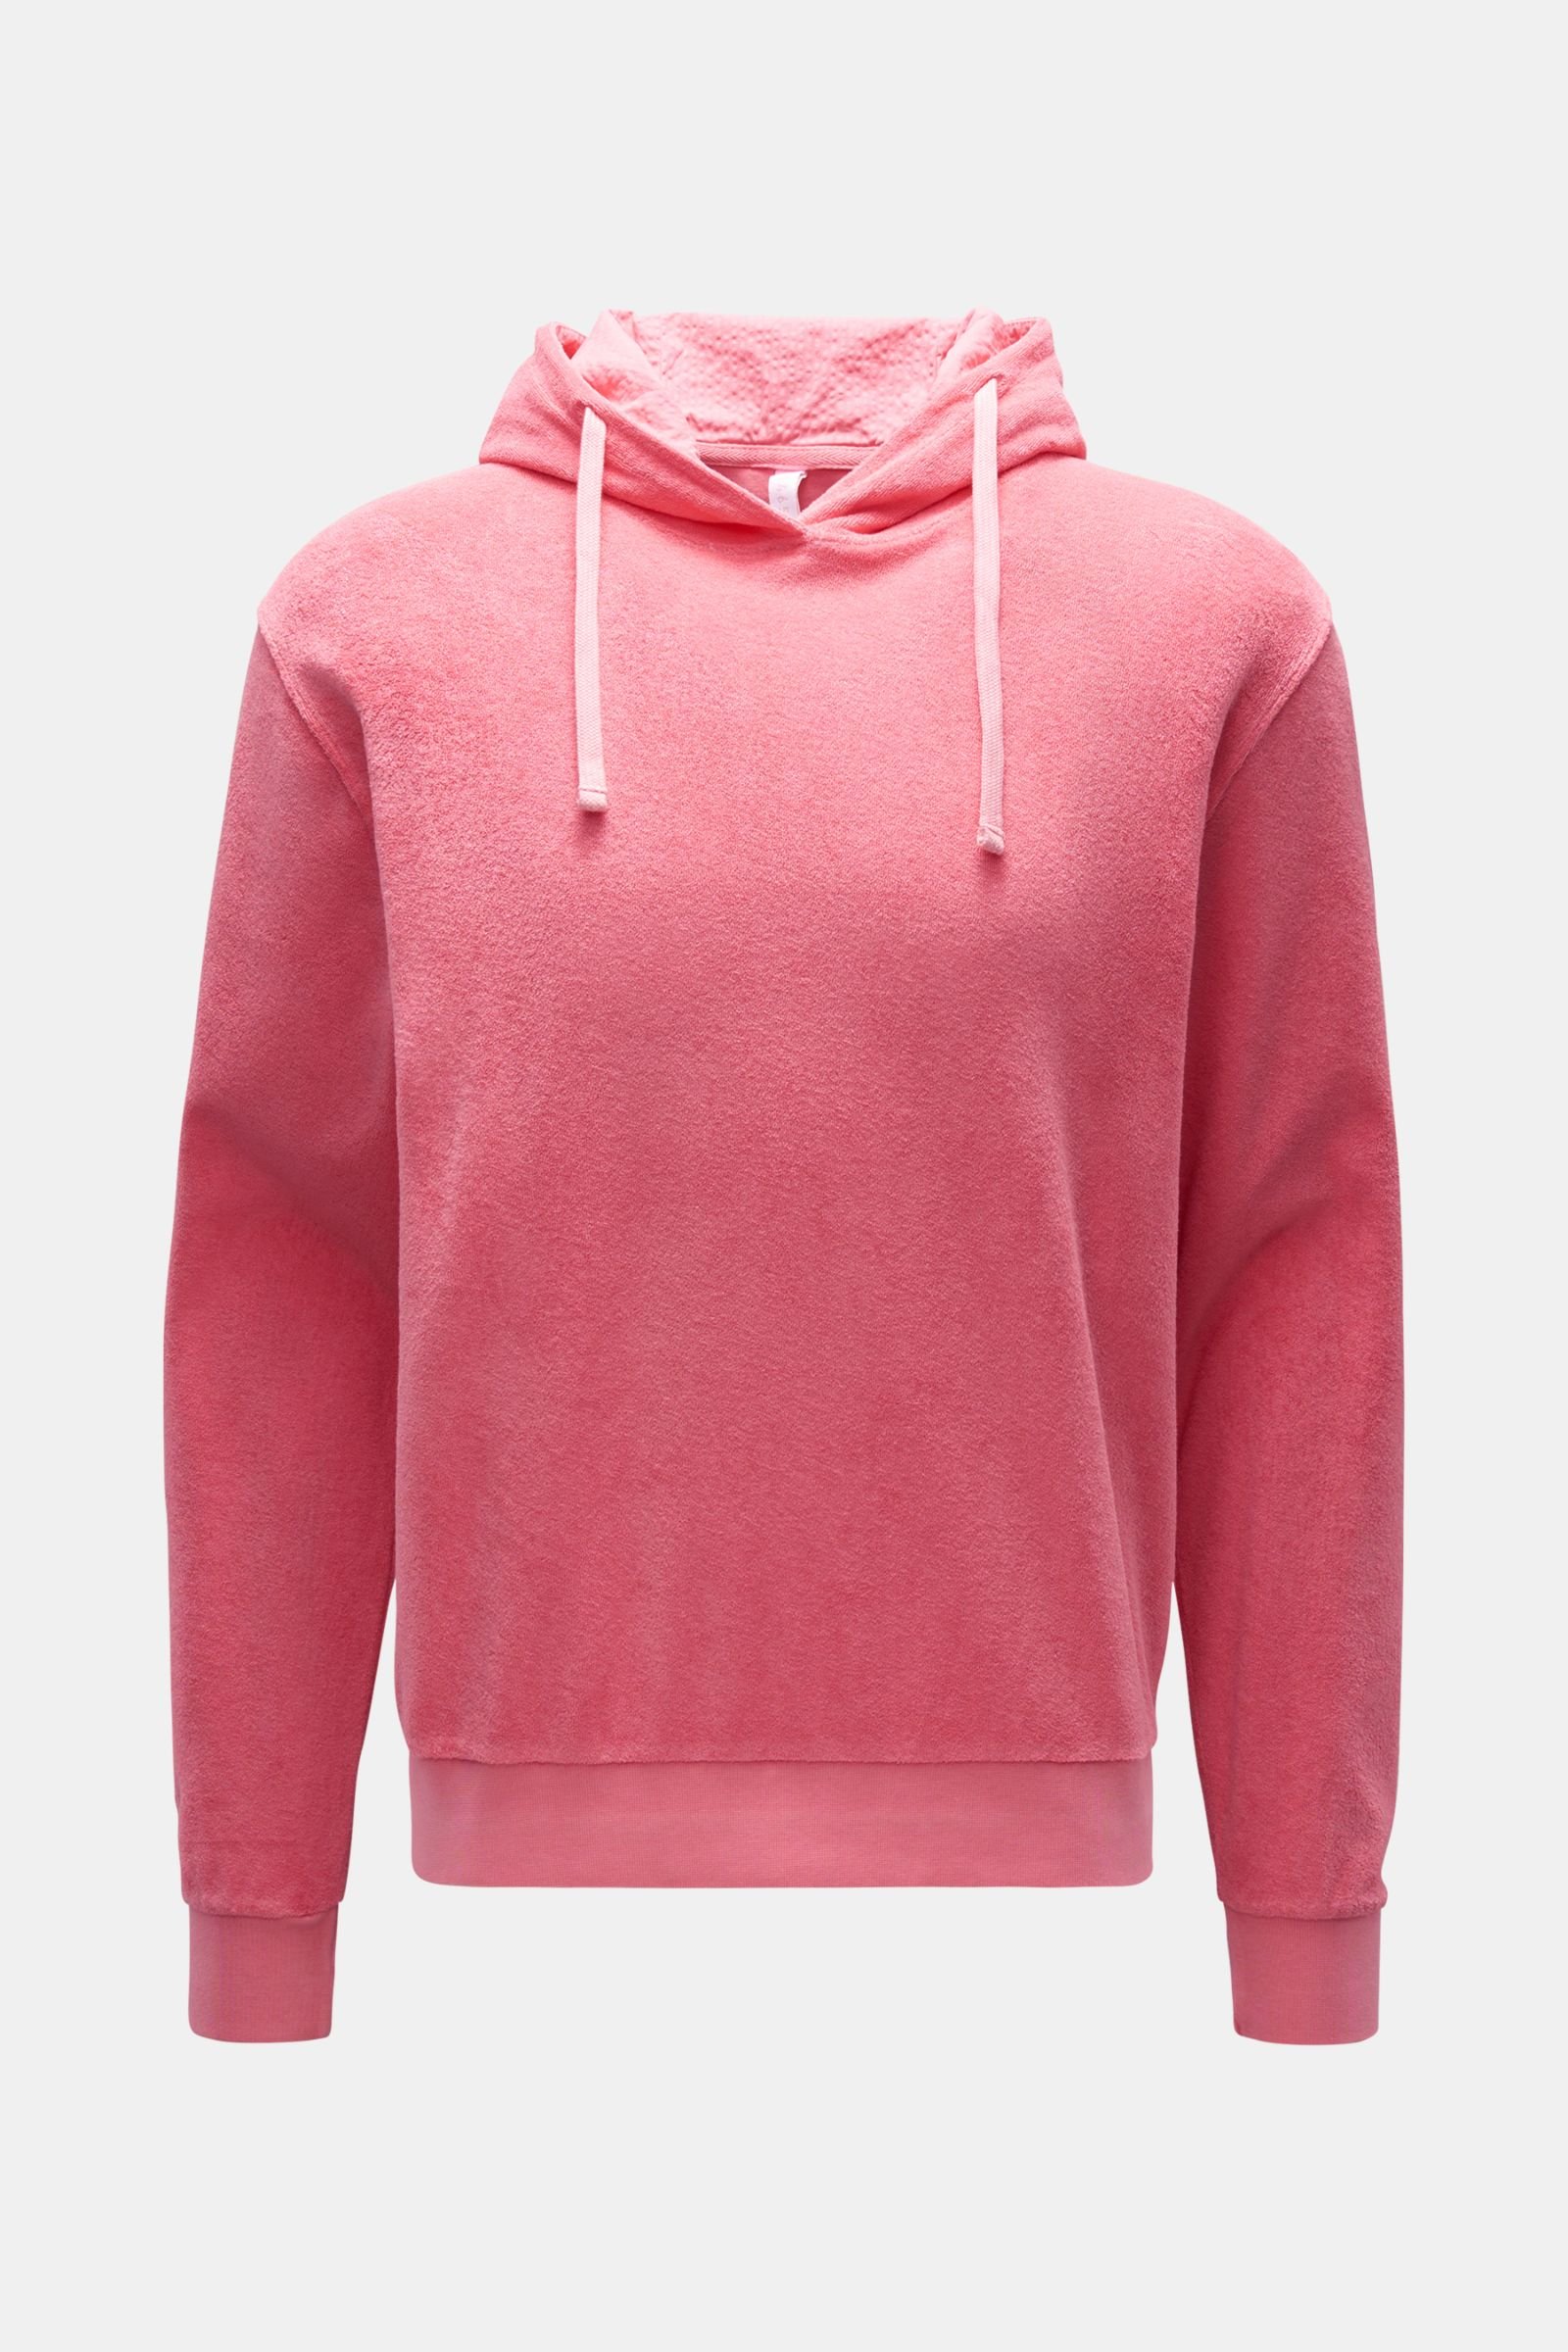 Terry hooded jumper 'Terry Hoody' coral